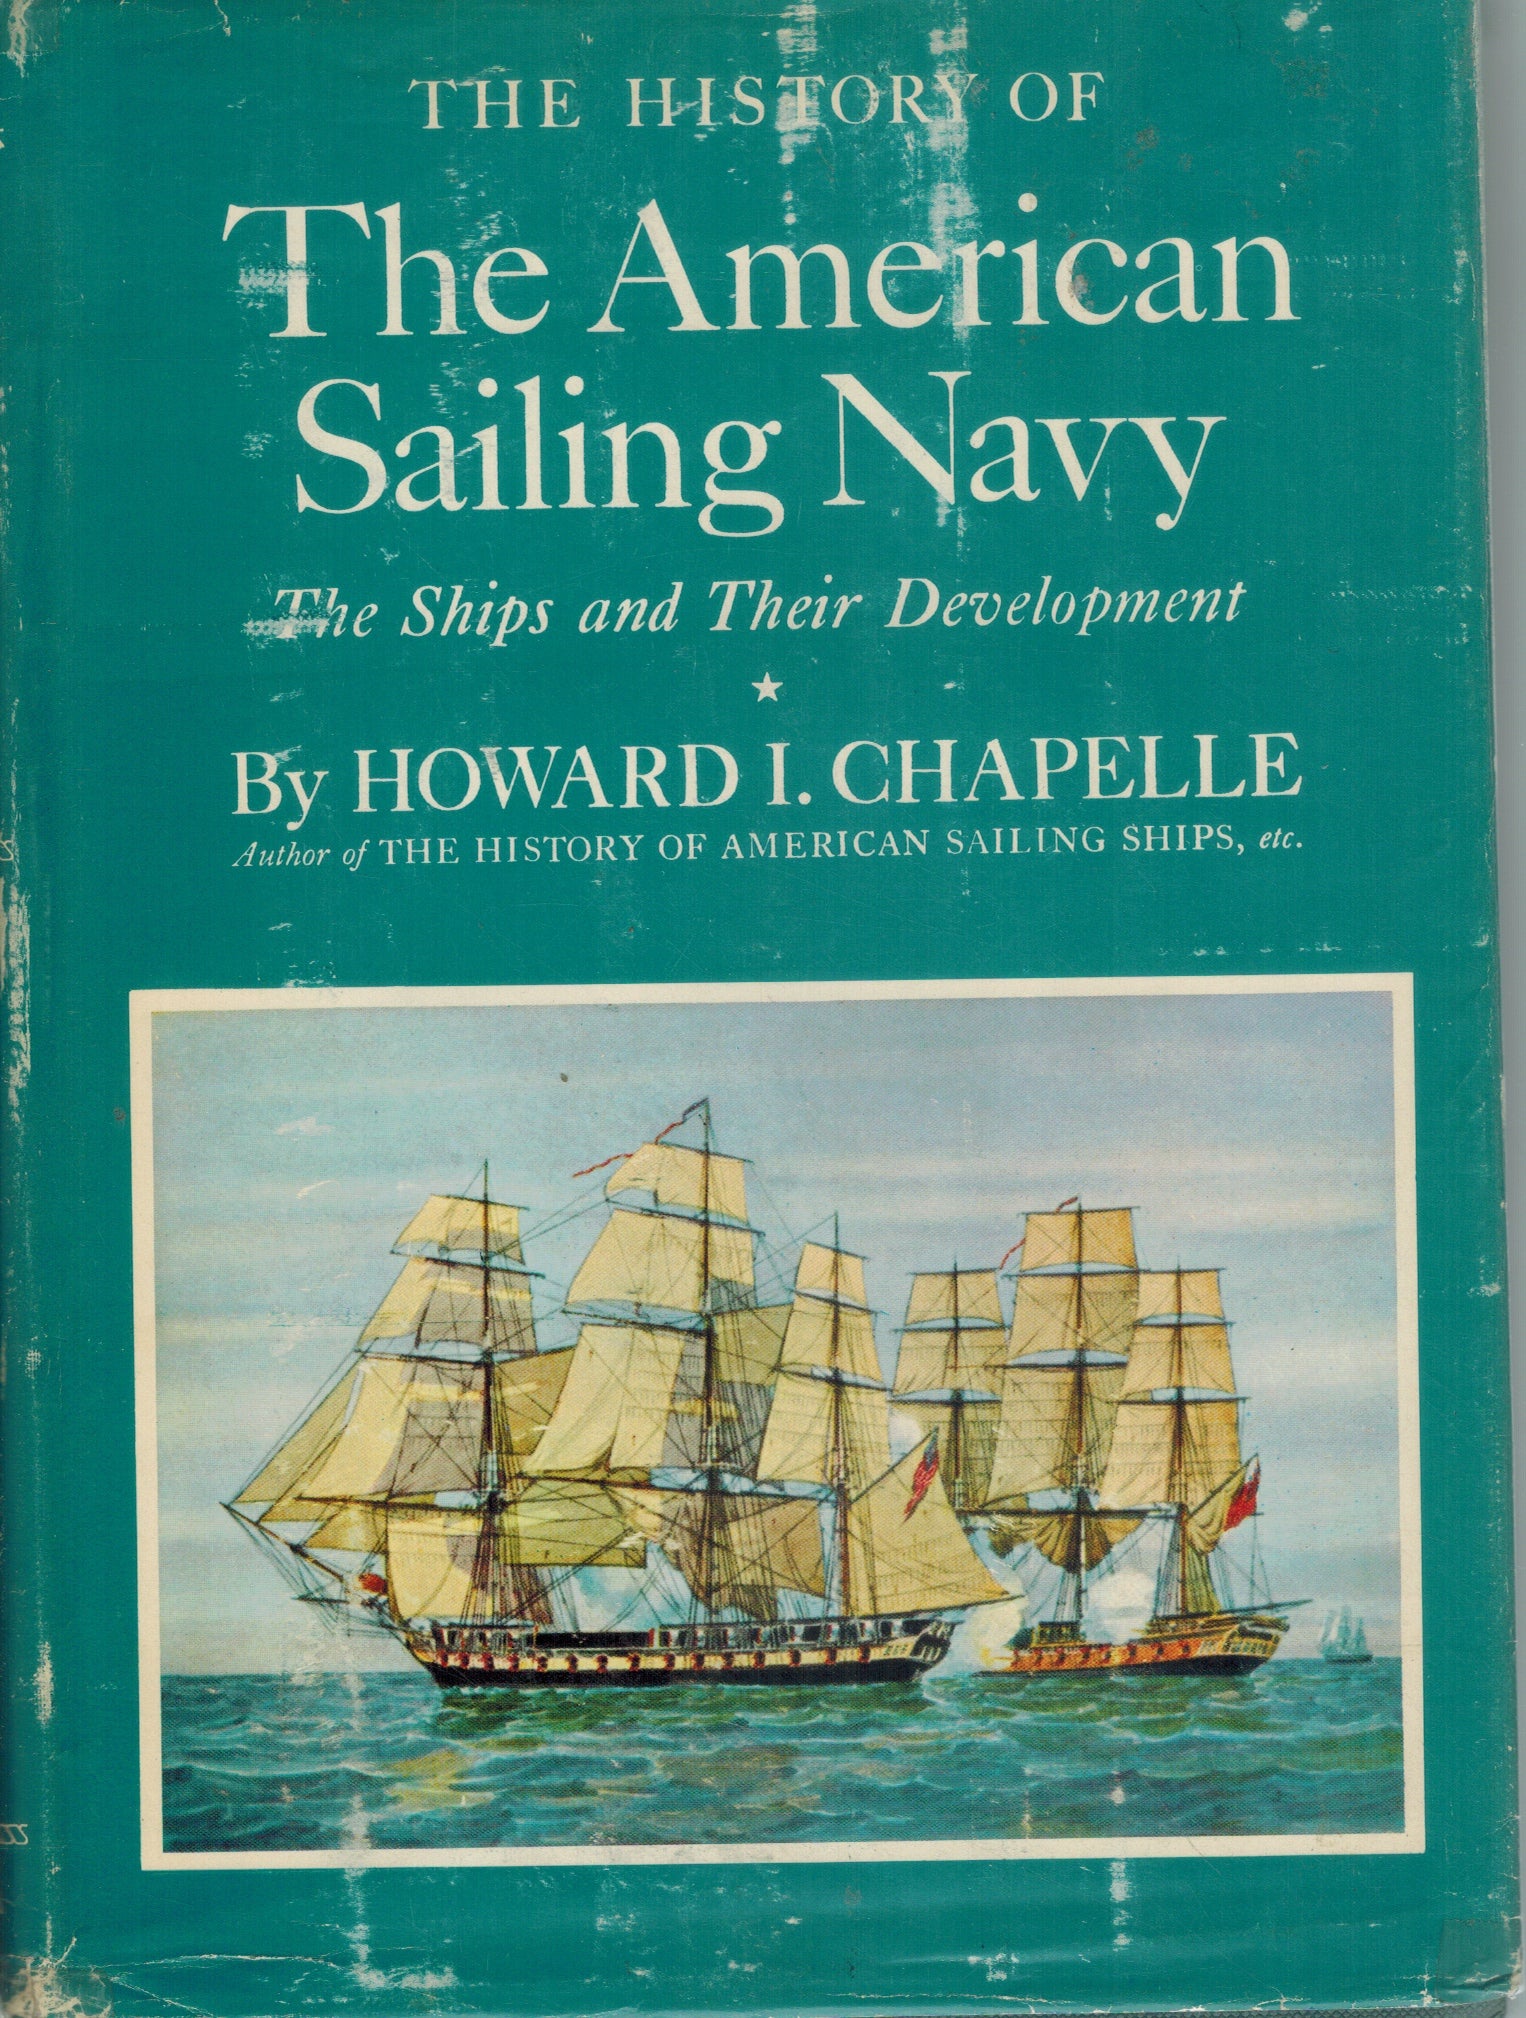 THE HISTORY OF THE AMERICAN SAILING NAVY